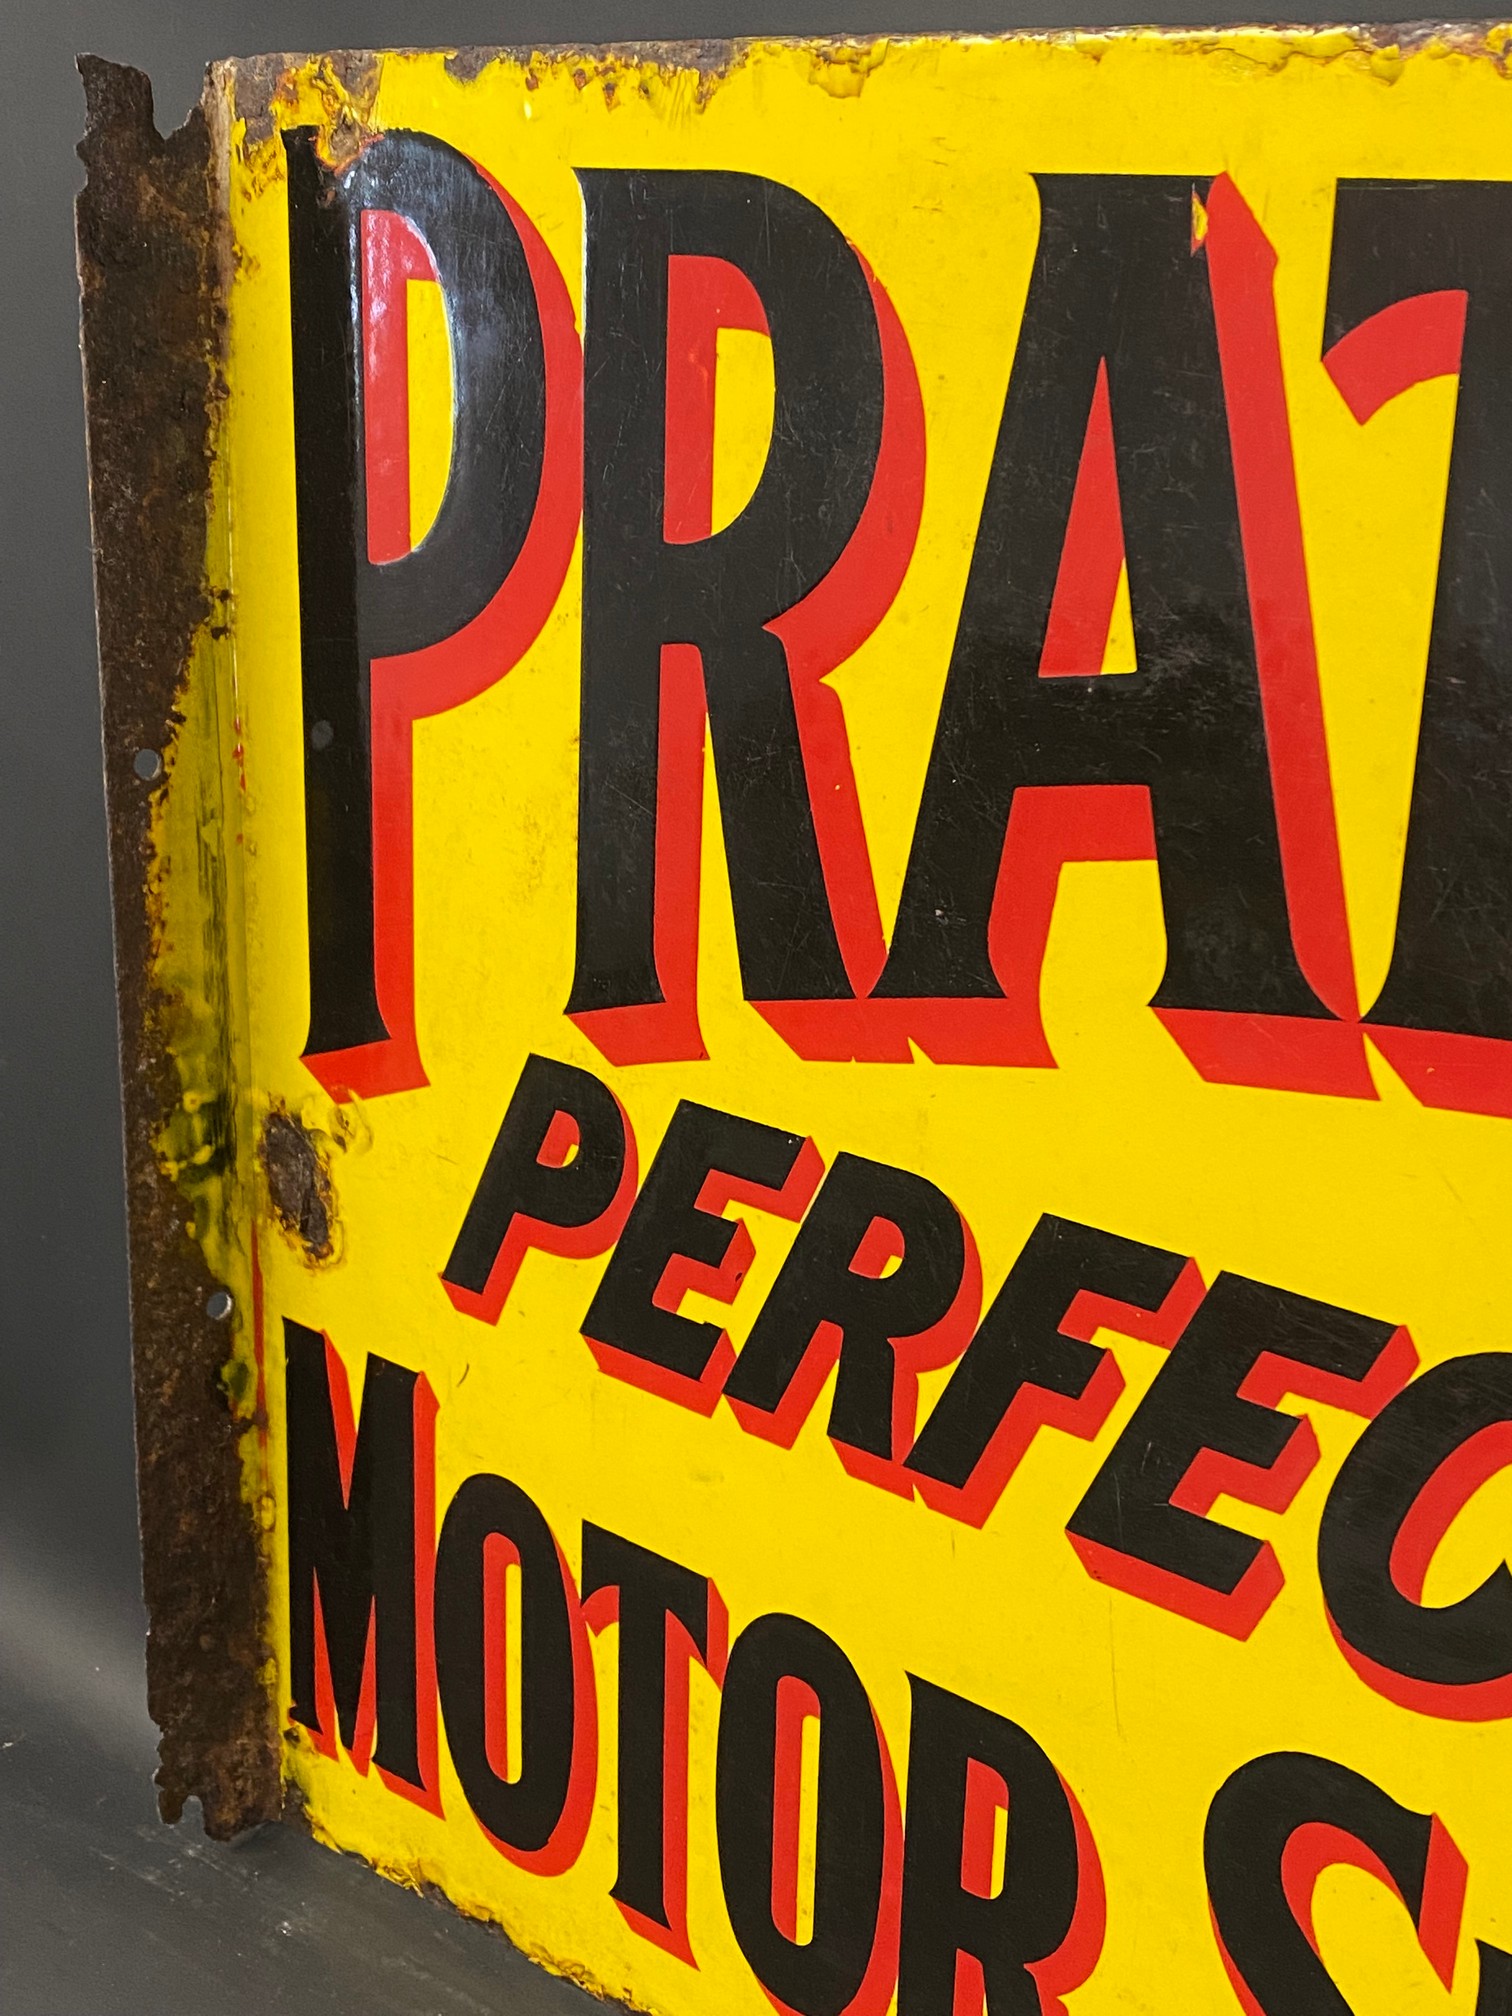 A Pratt's Perfection Motor Spirit double sided enamel sign by Bruton, 21 x 18". - Image 3 of 5